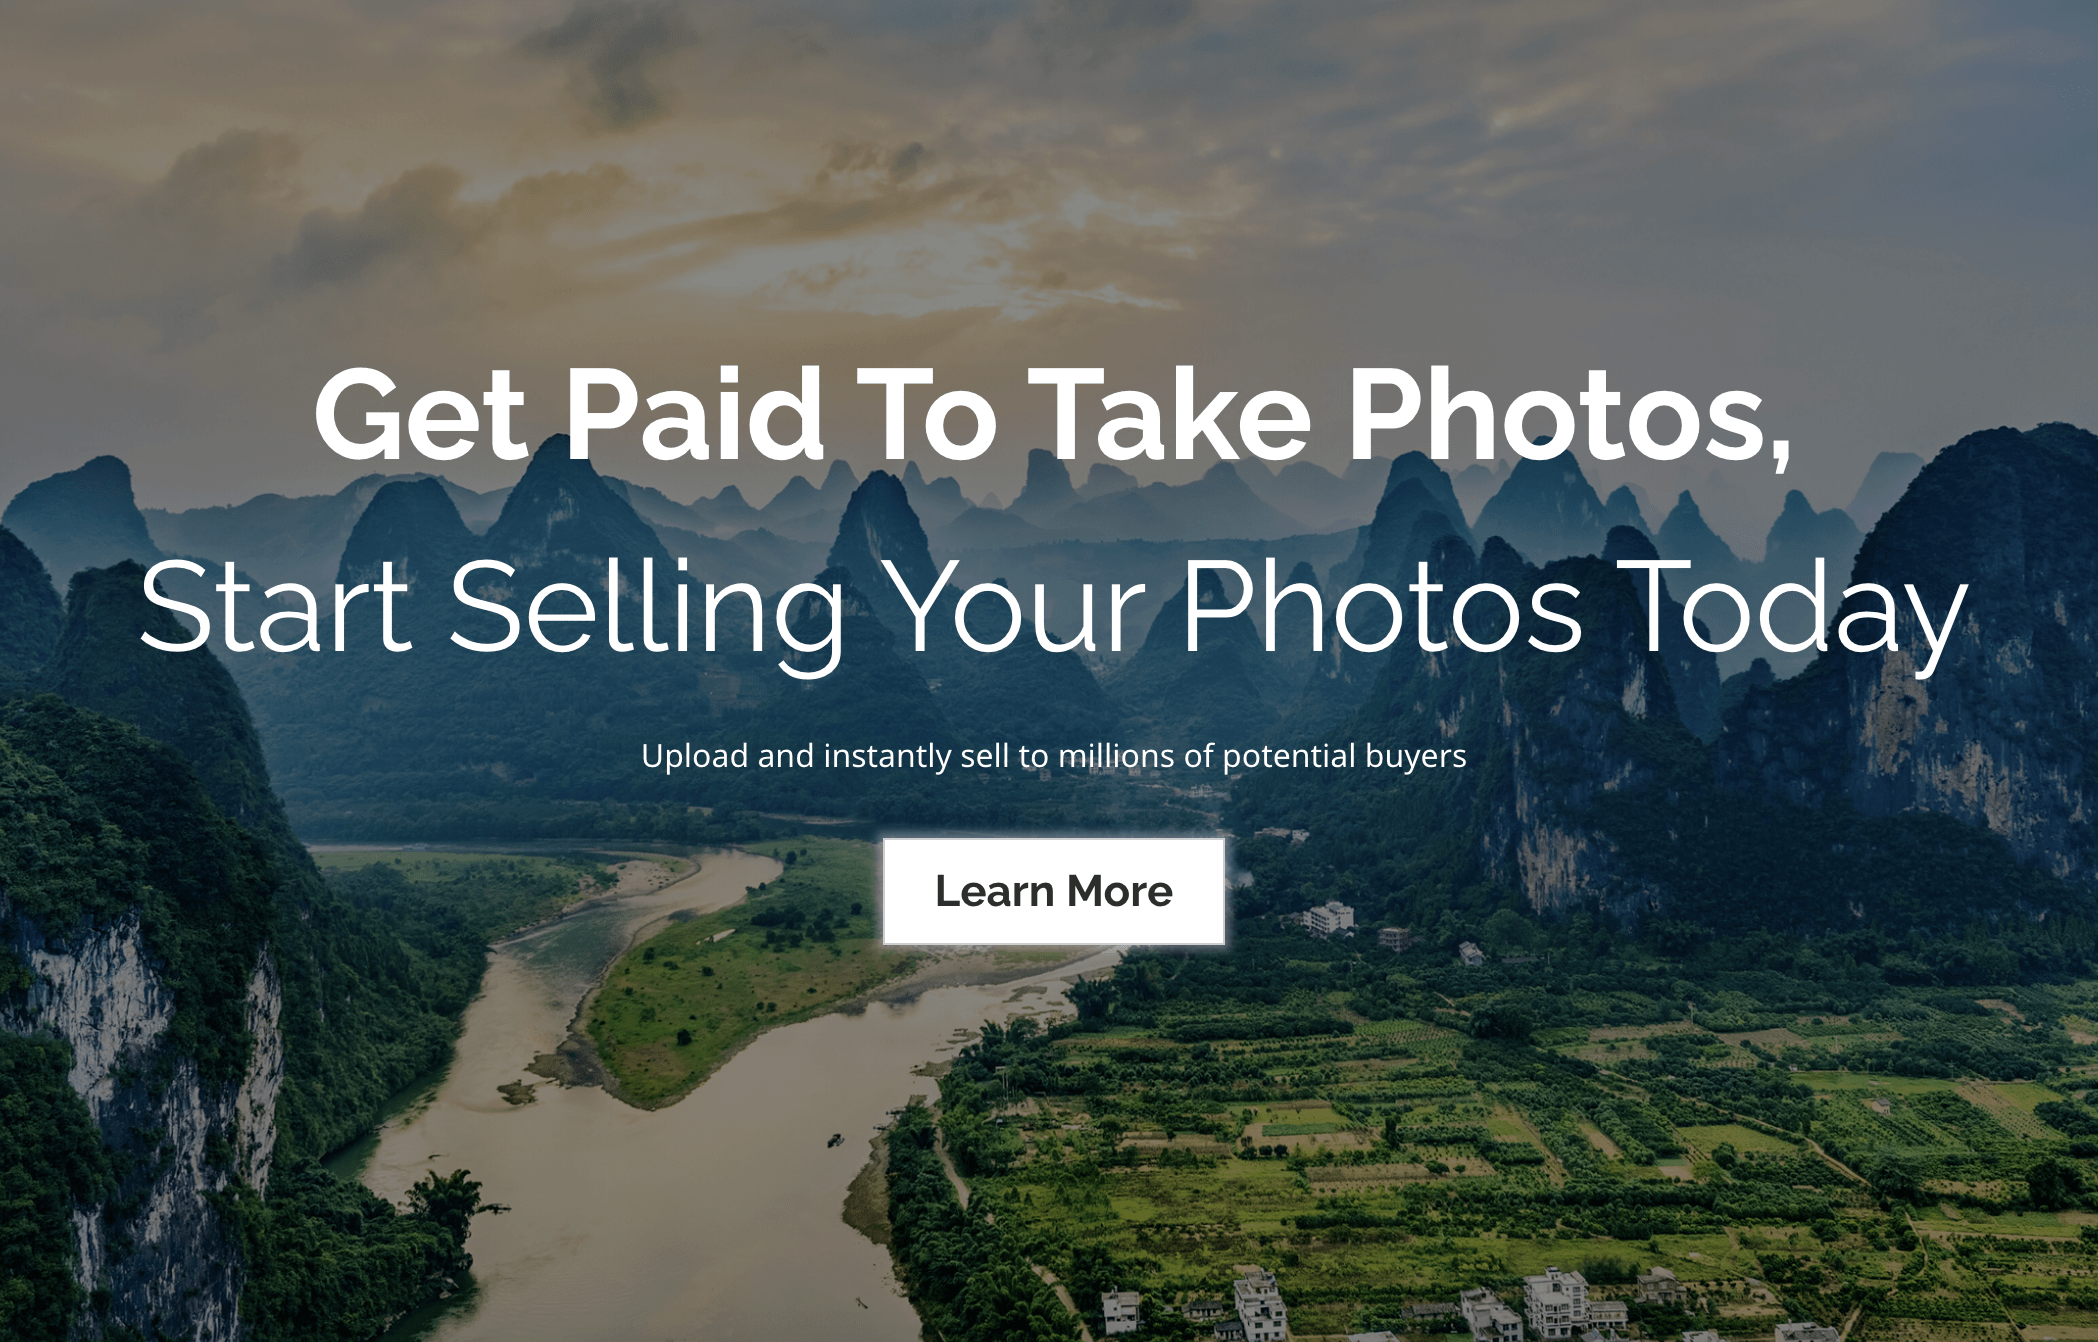 Best place to sell photos online